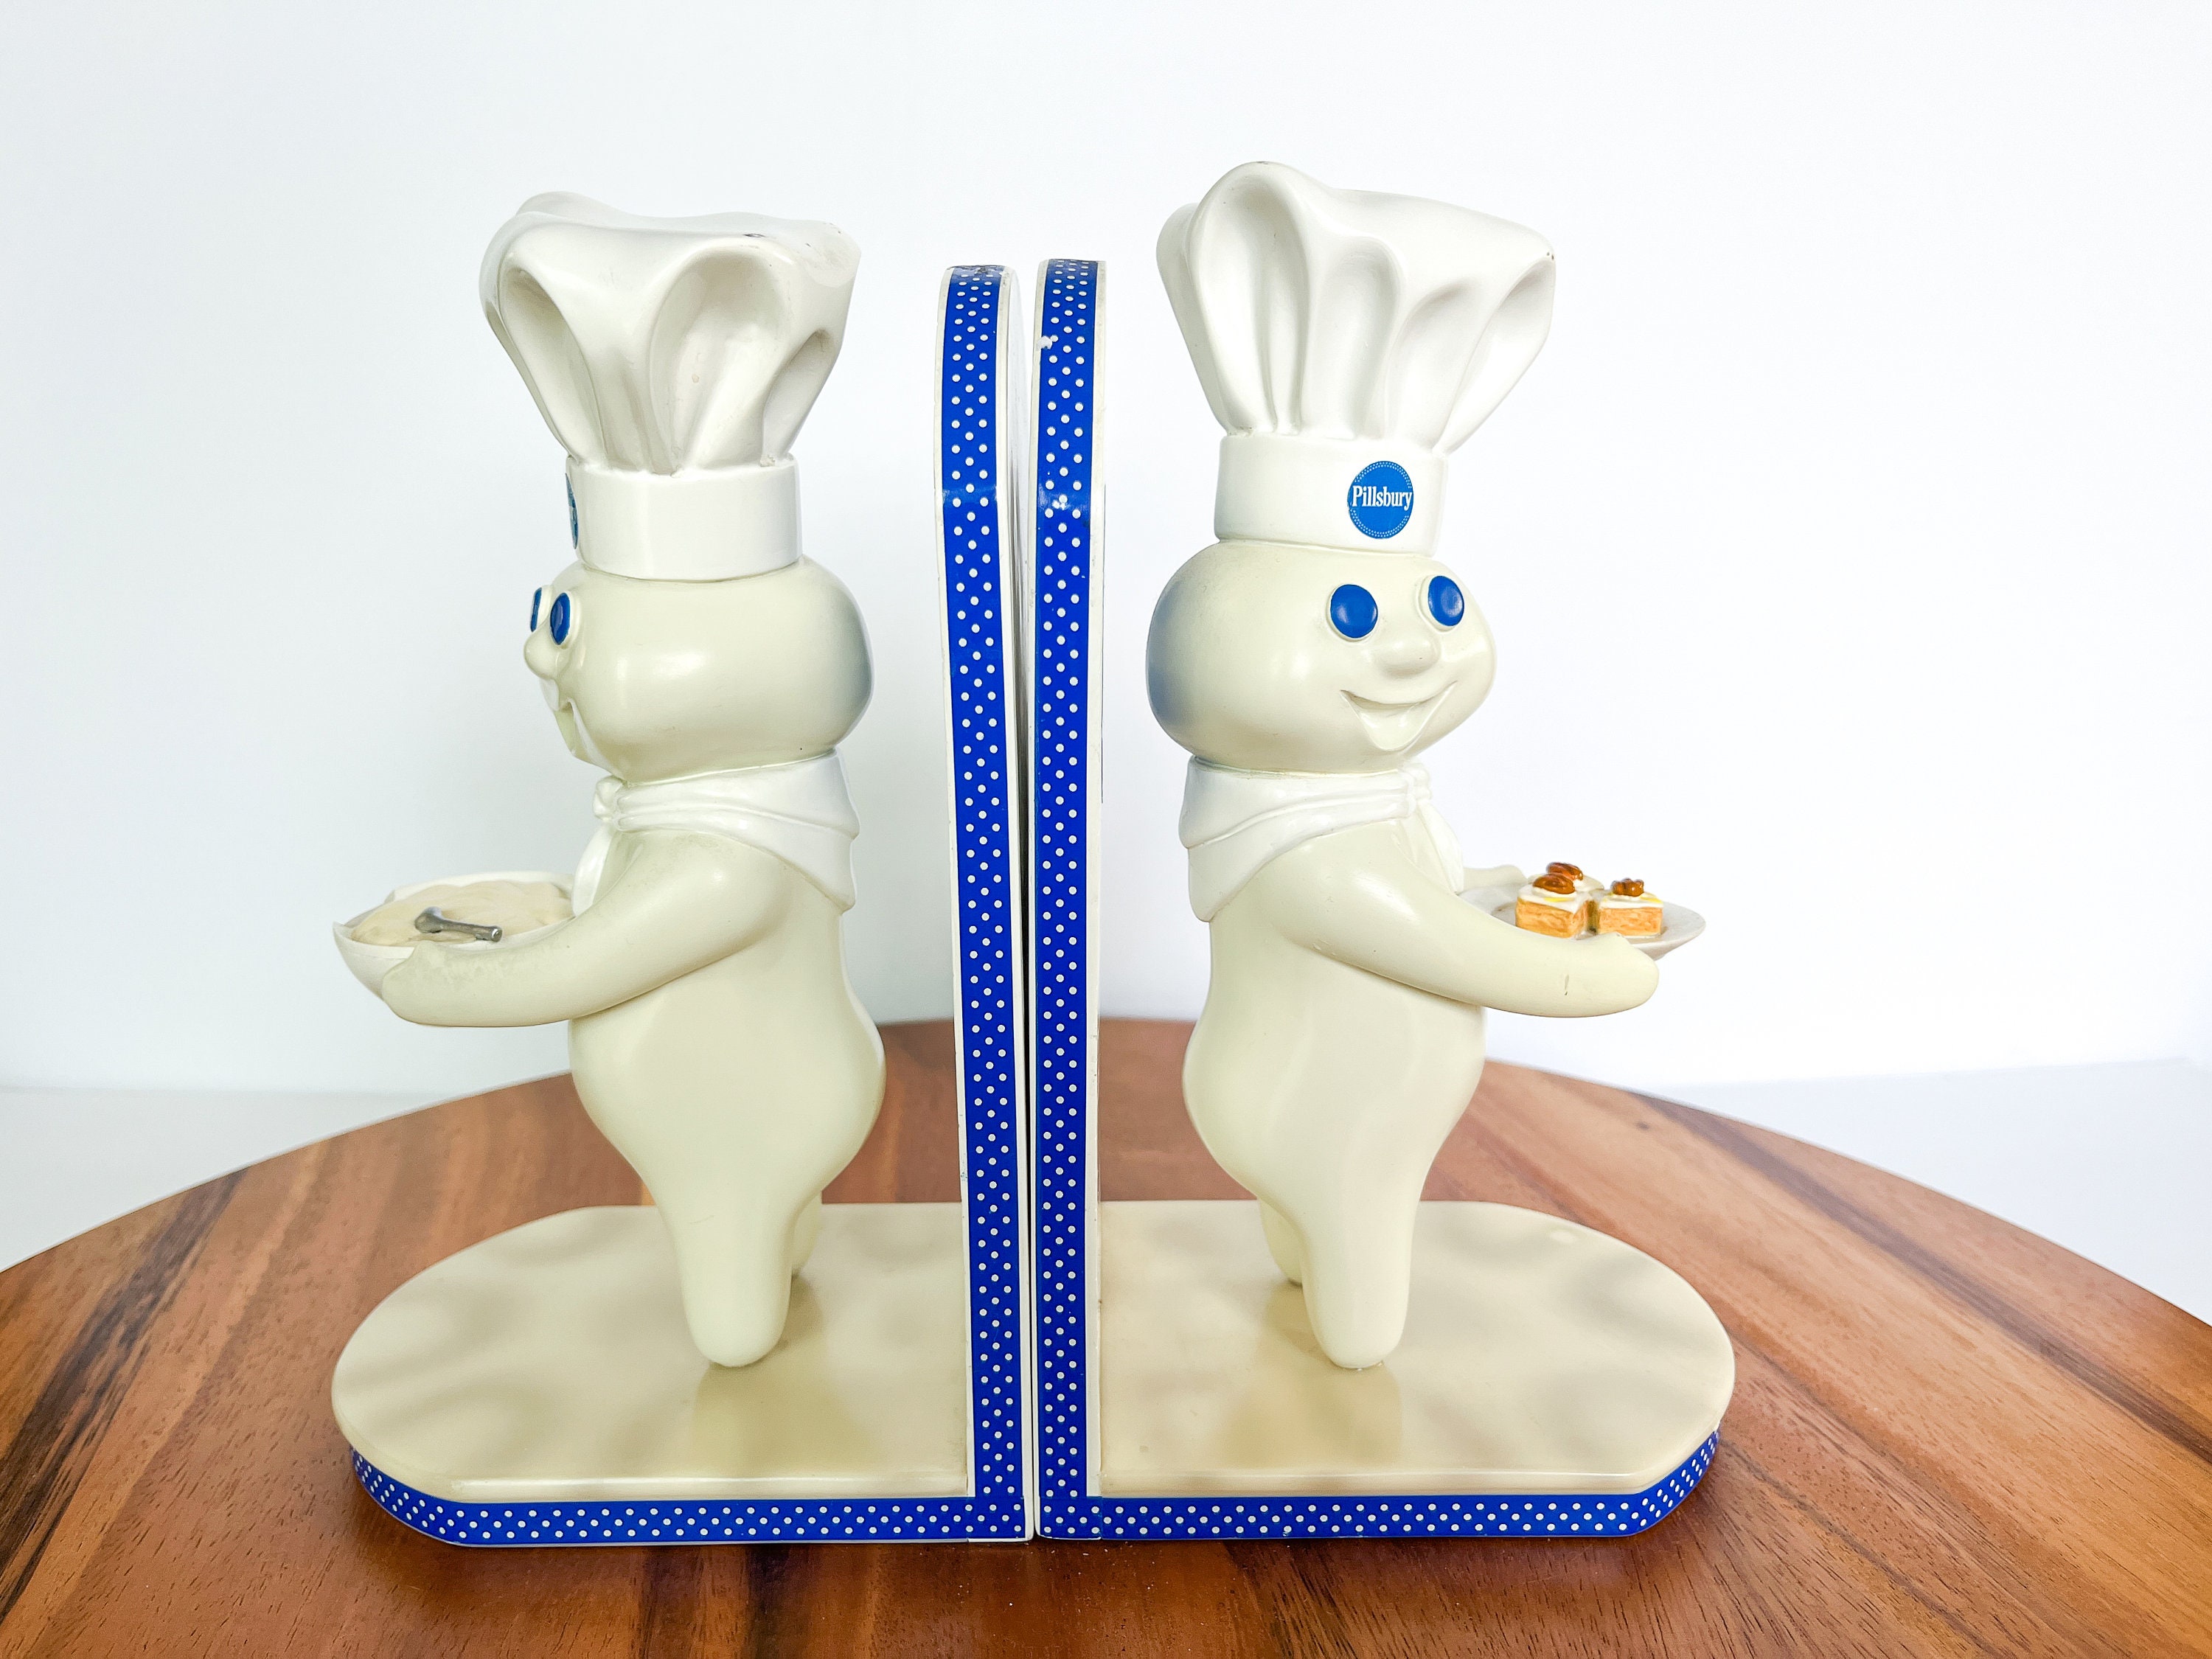 5.5 the Big Cheese From Pillsbury Doughboy Collector Figurines -   Denmark